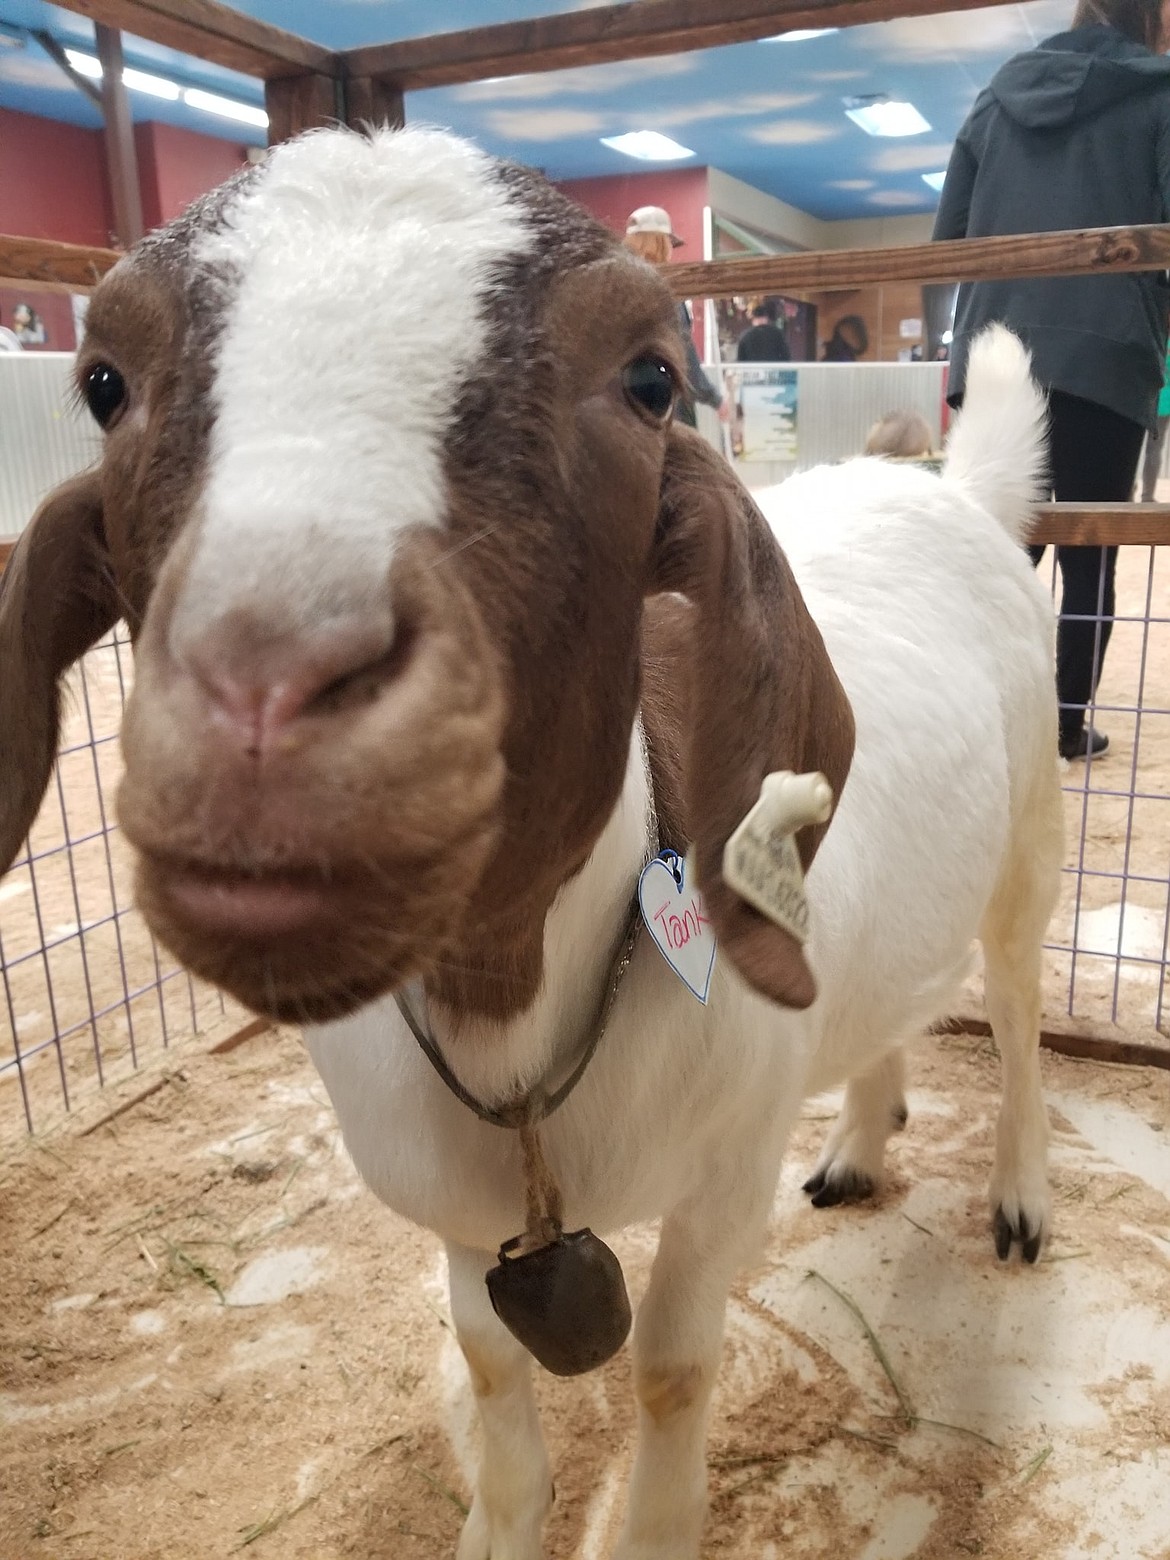 Tank the goat is a favorite at Big Red's.